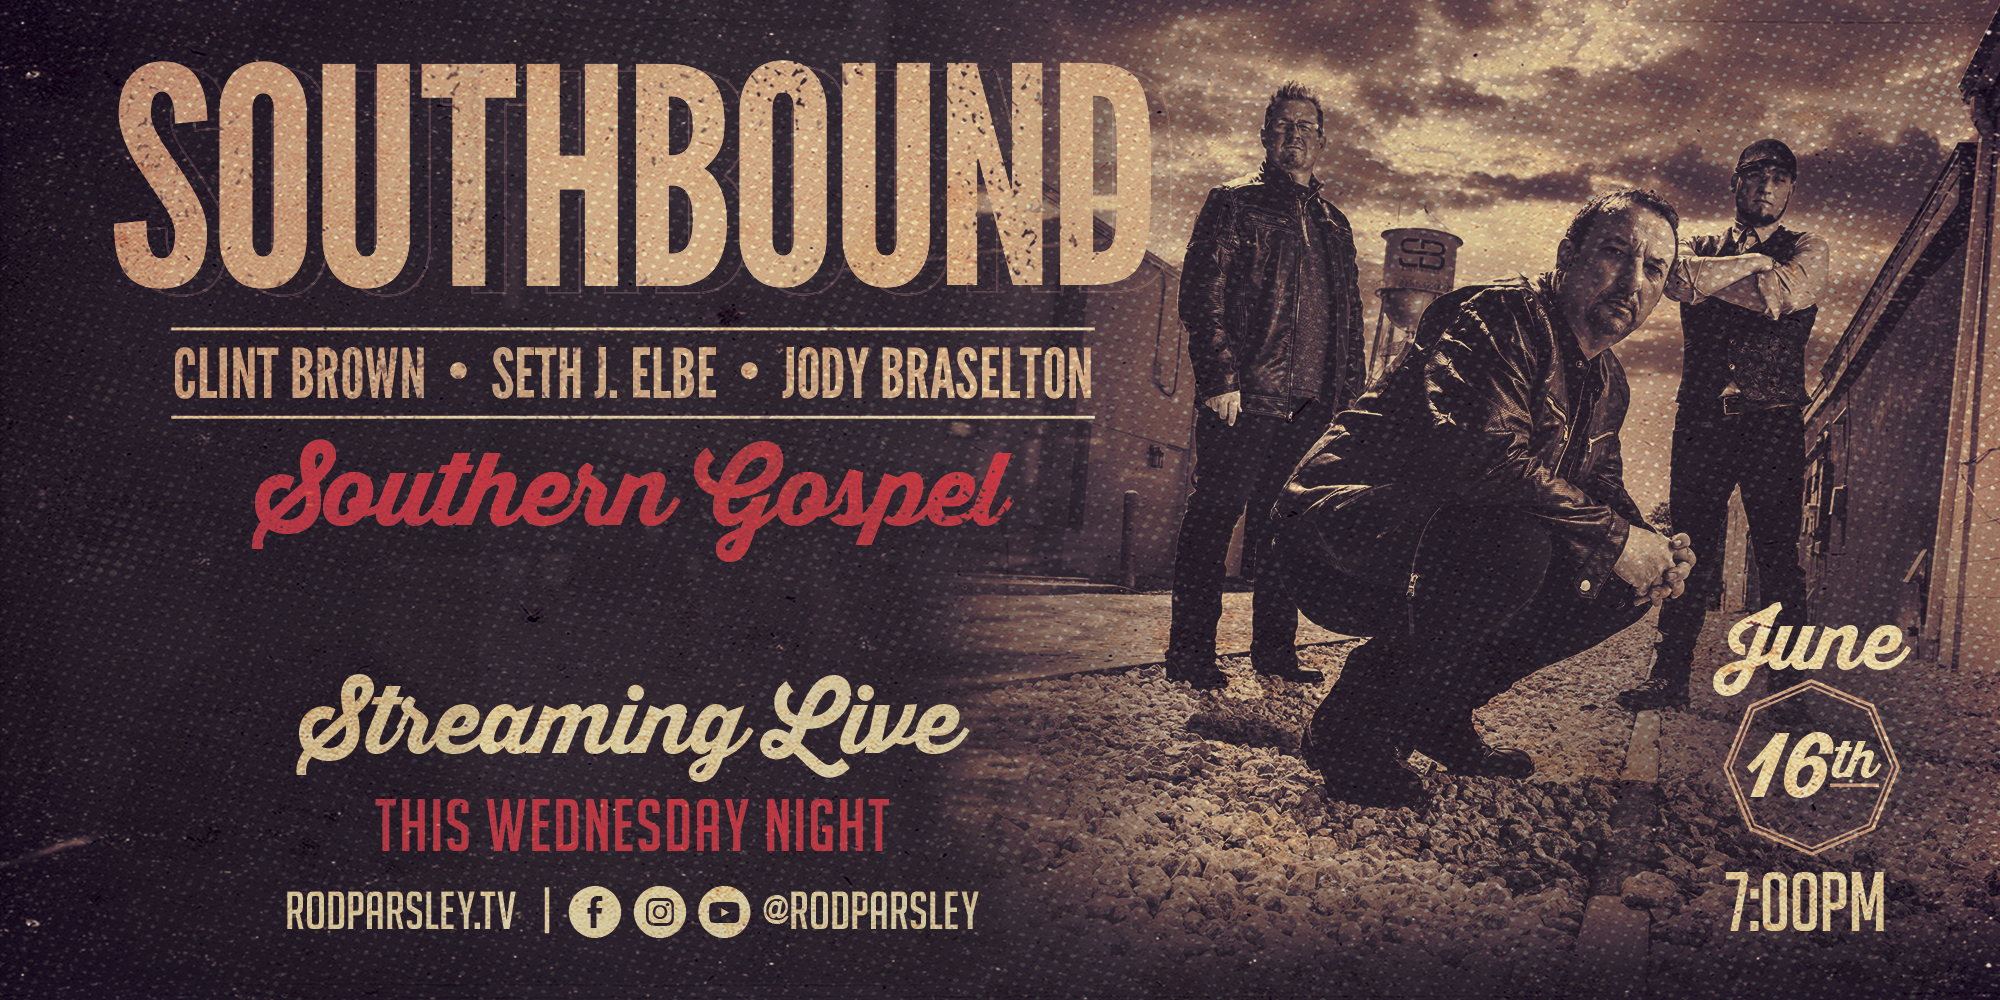 Southbound Sothern Gospel Trip Clint Brown Seth J. Elbe Jody Braselton Streaming Live with Pastor Rod Parsley June 16th 7pm Rodparsley.Tv Facebook Instagram Youtube @rodparsley World Harvest Church Whc.Life